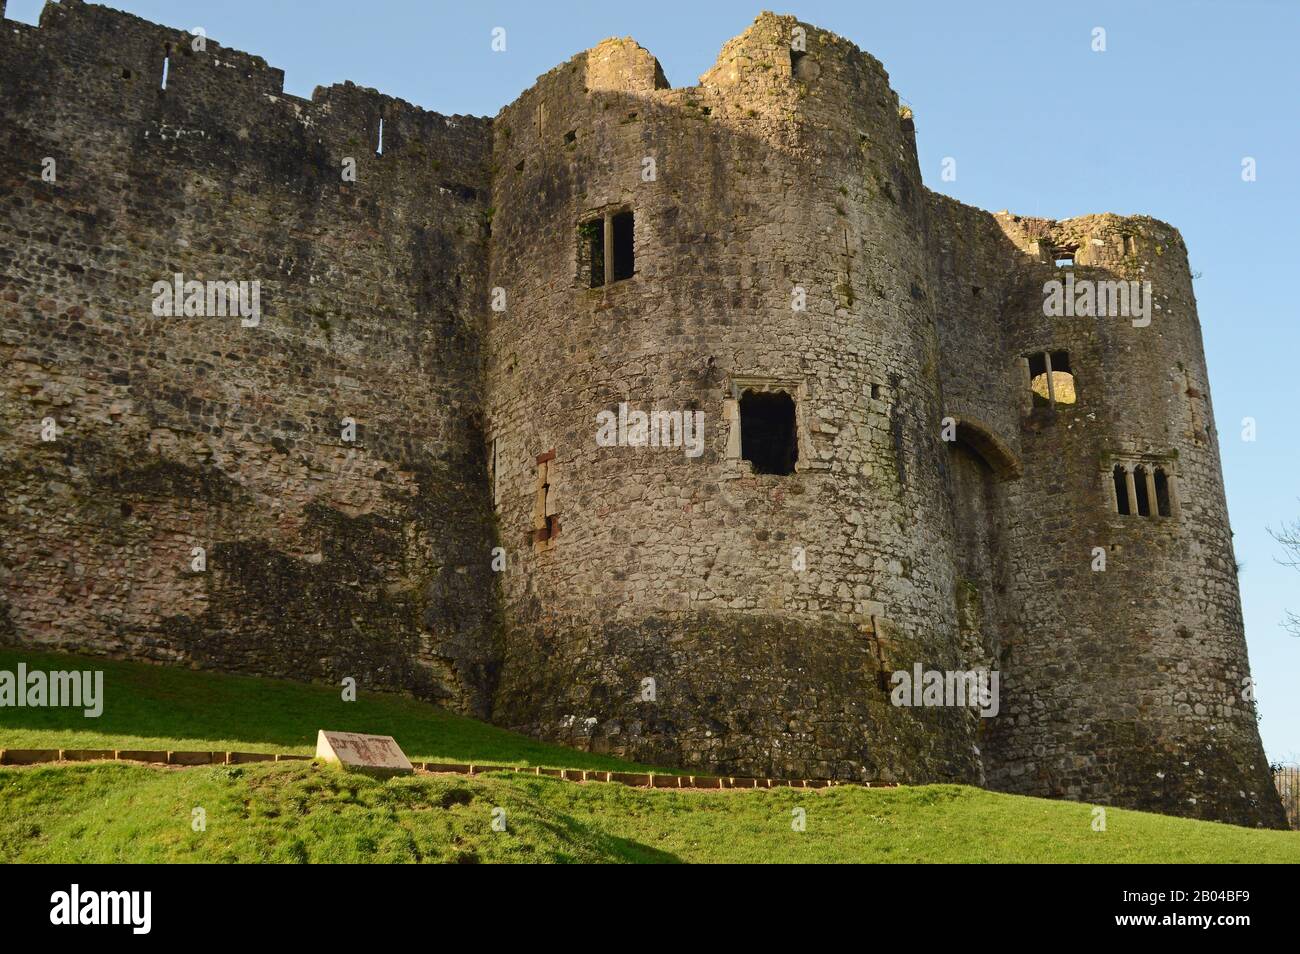 The main gatehouse entrance (between the two towers) to Chepstow Castle in Monmouthshire, South Wales, United Kingdom. Stock Photo